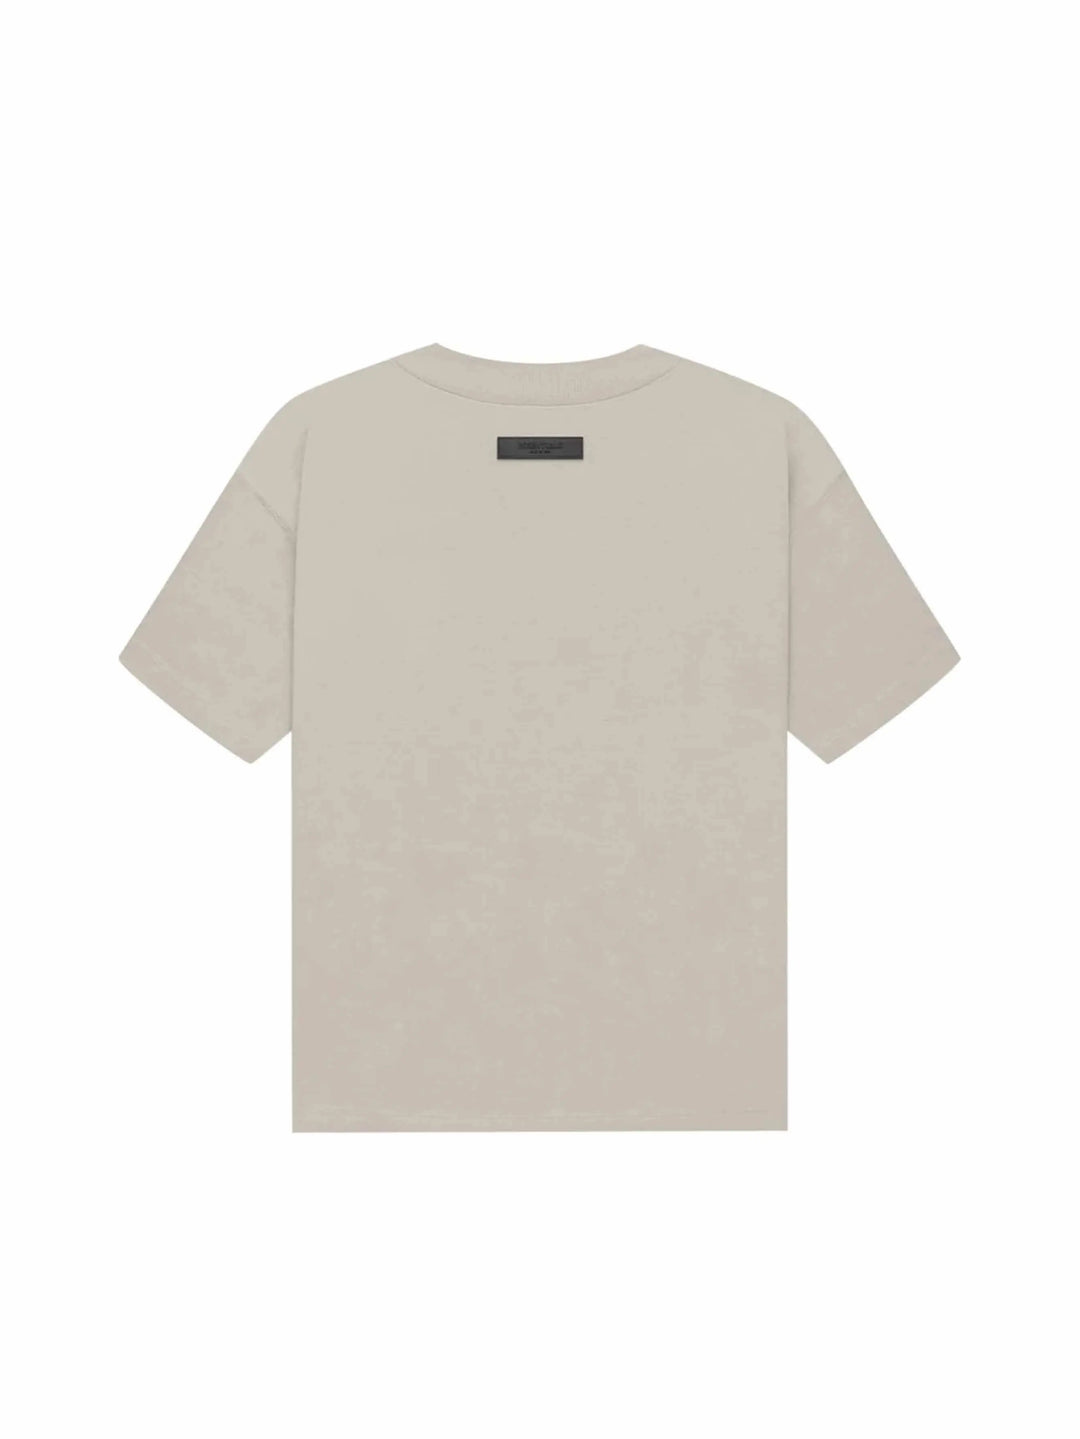 Fear of God Essentials Tee Smoke in Auckland, New Zealand - Shop name